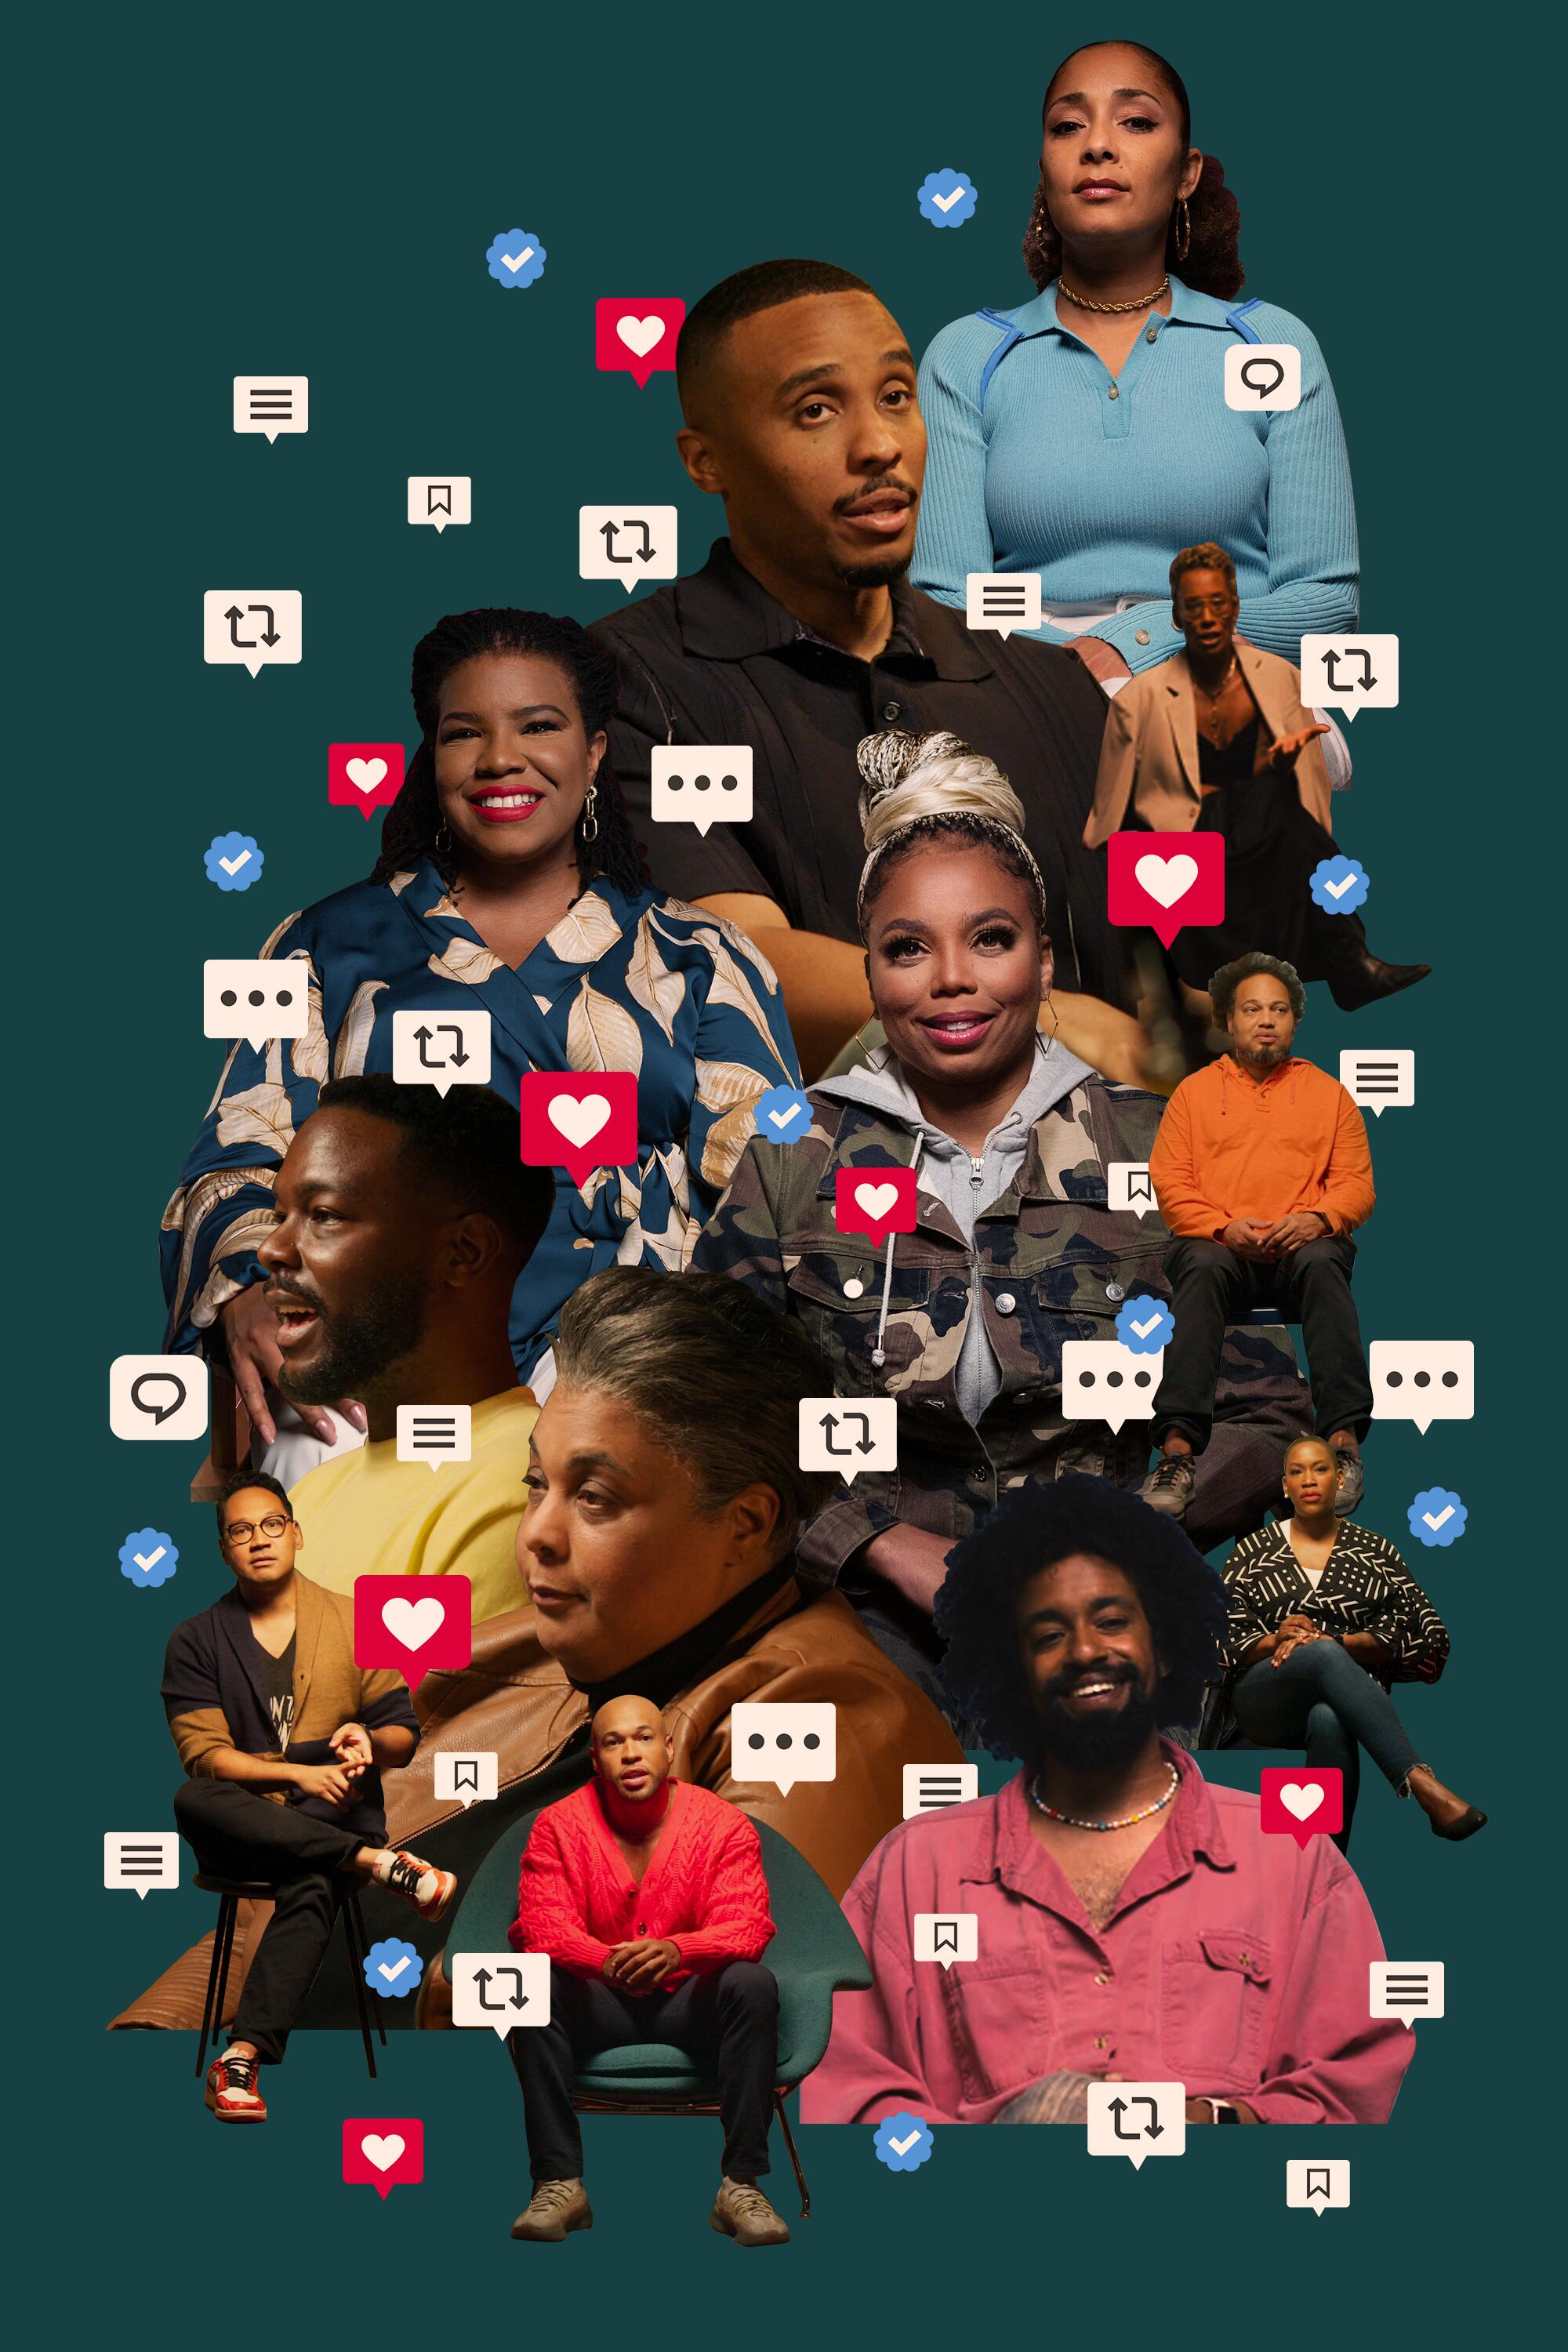 photo collage of figures from Hulu's Black Twitter documentary arranged with social media icons